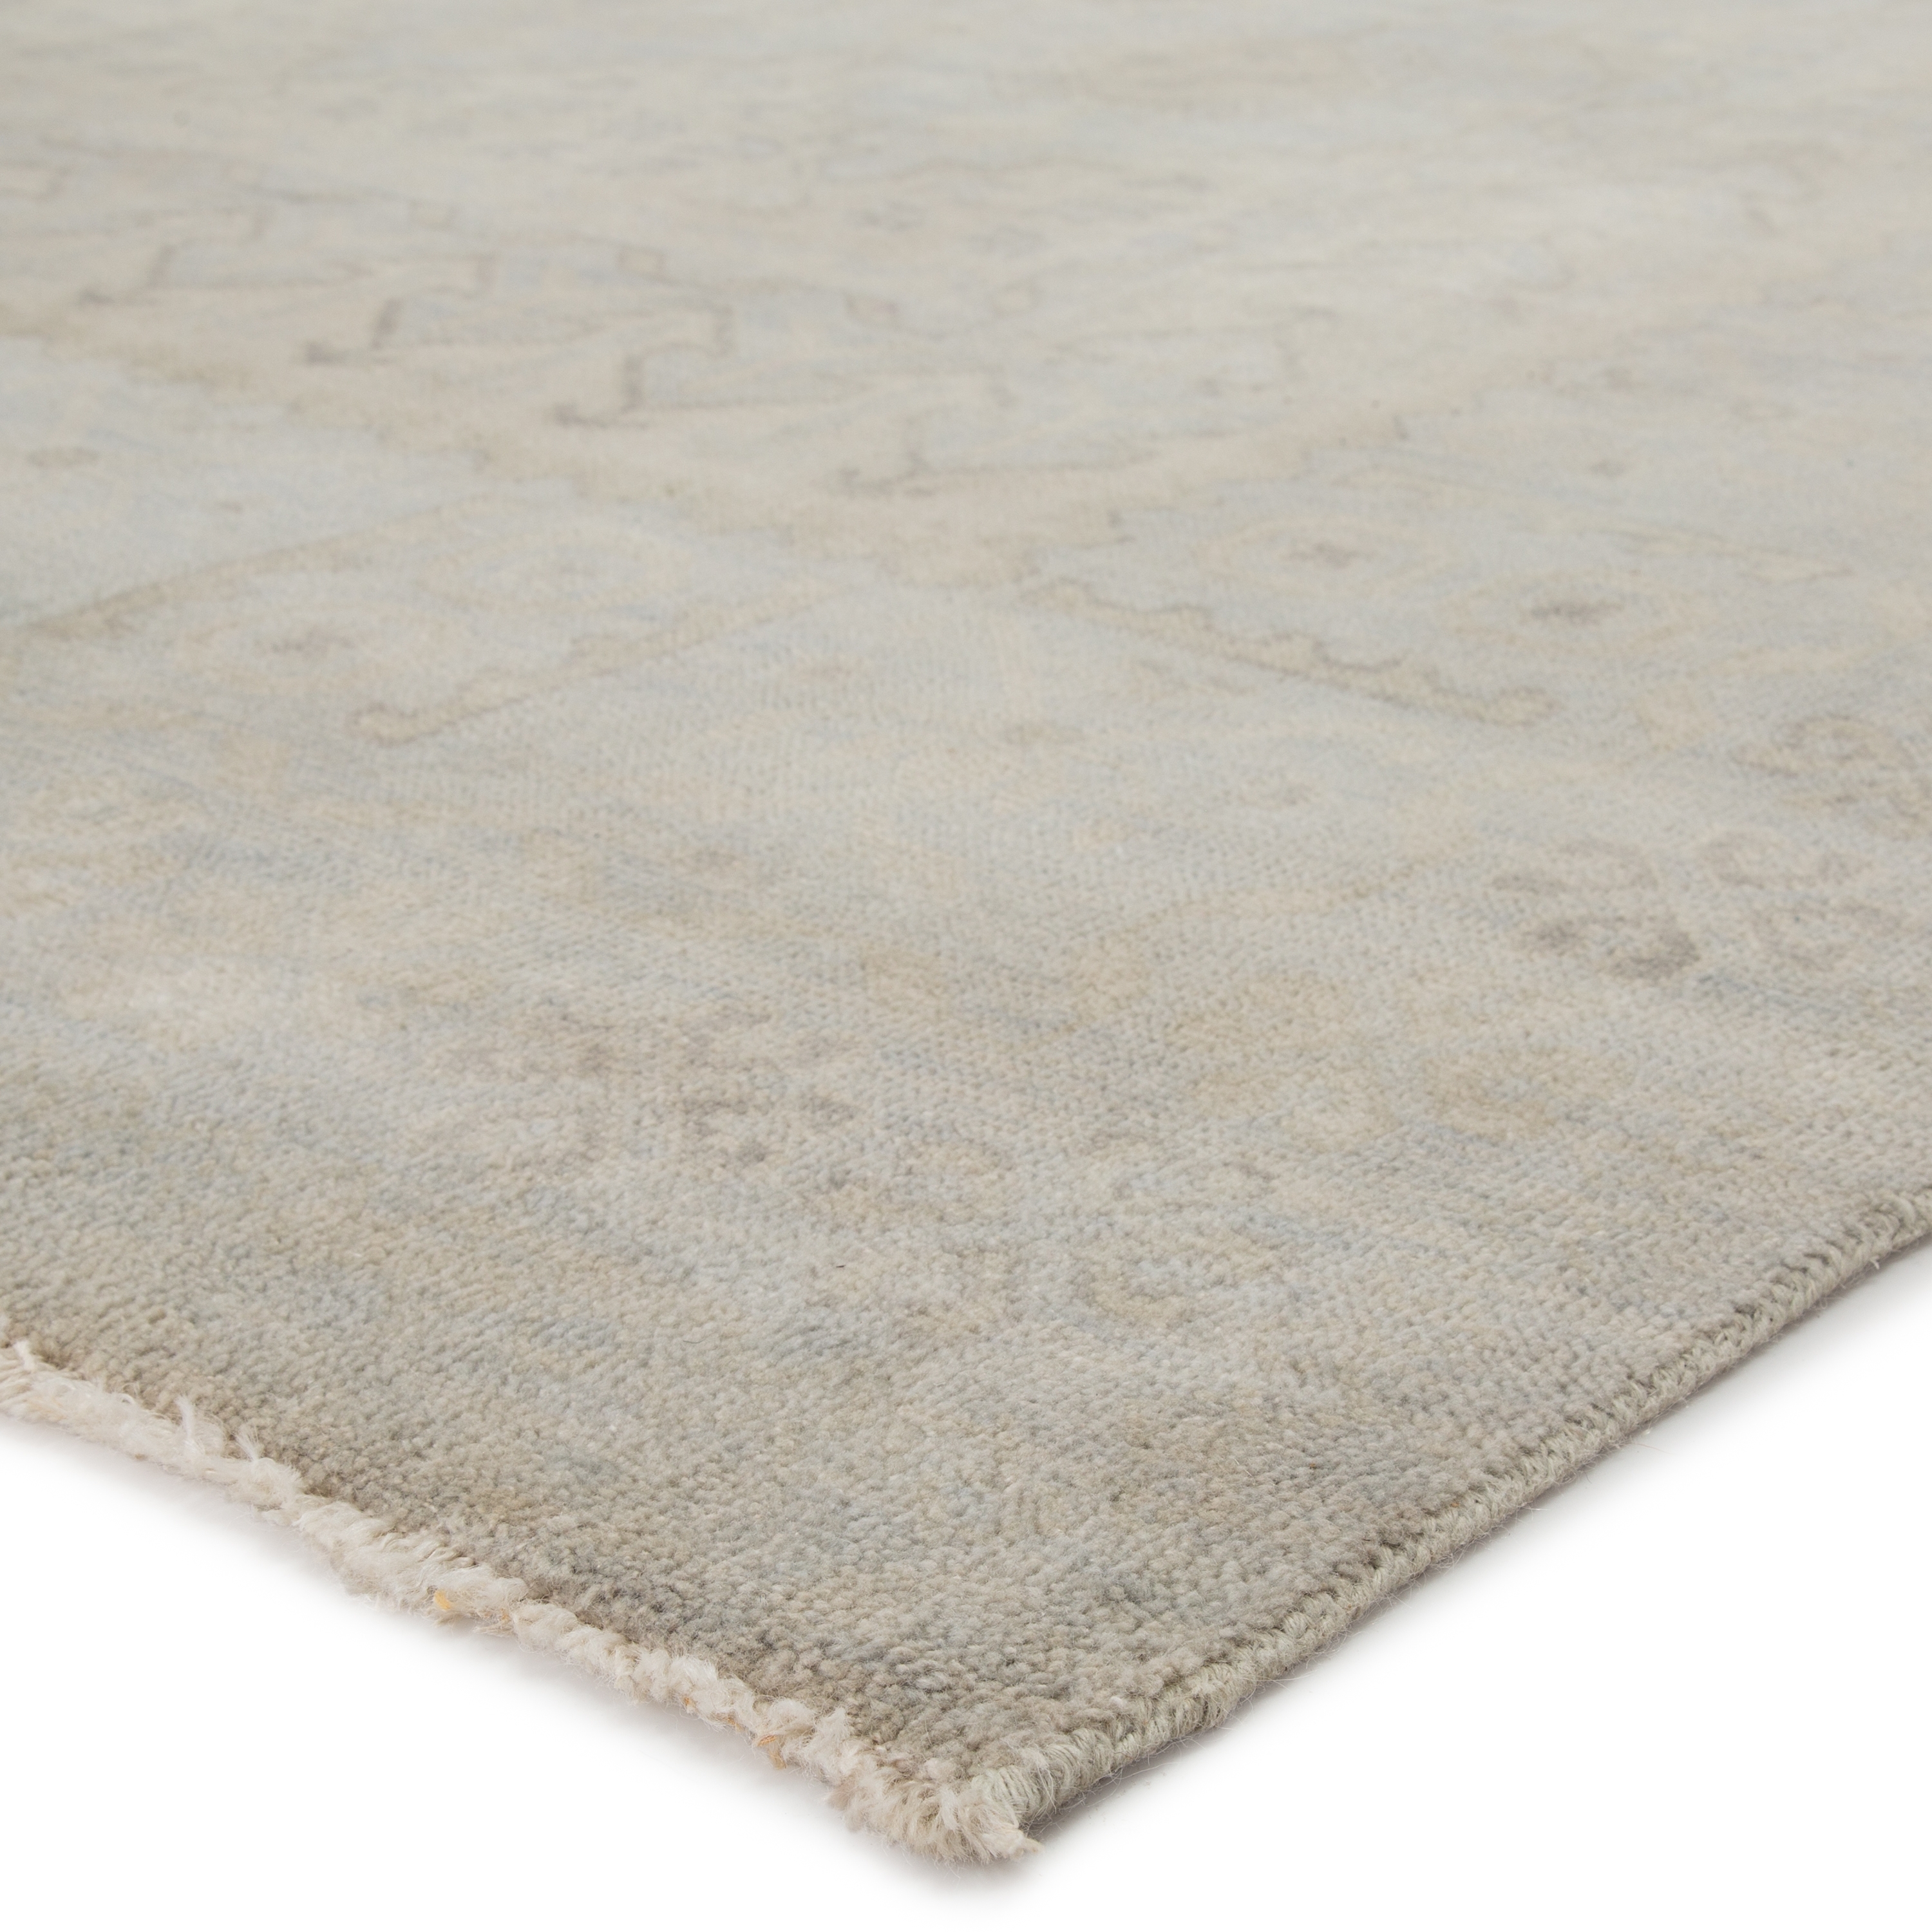 Chival Hand-Knotted Tribal Light Gray/ Beige Area Rug (8'X11') - Image 1